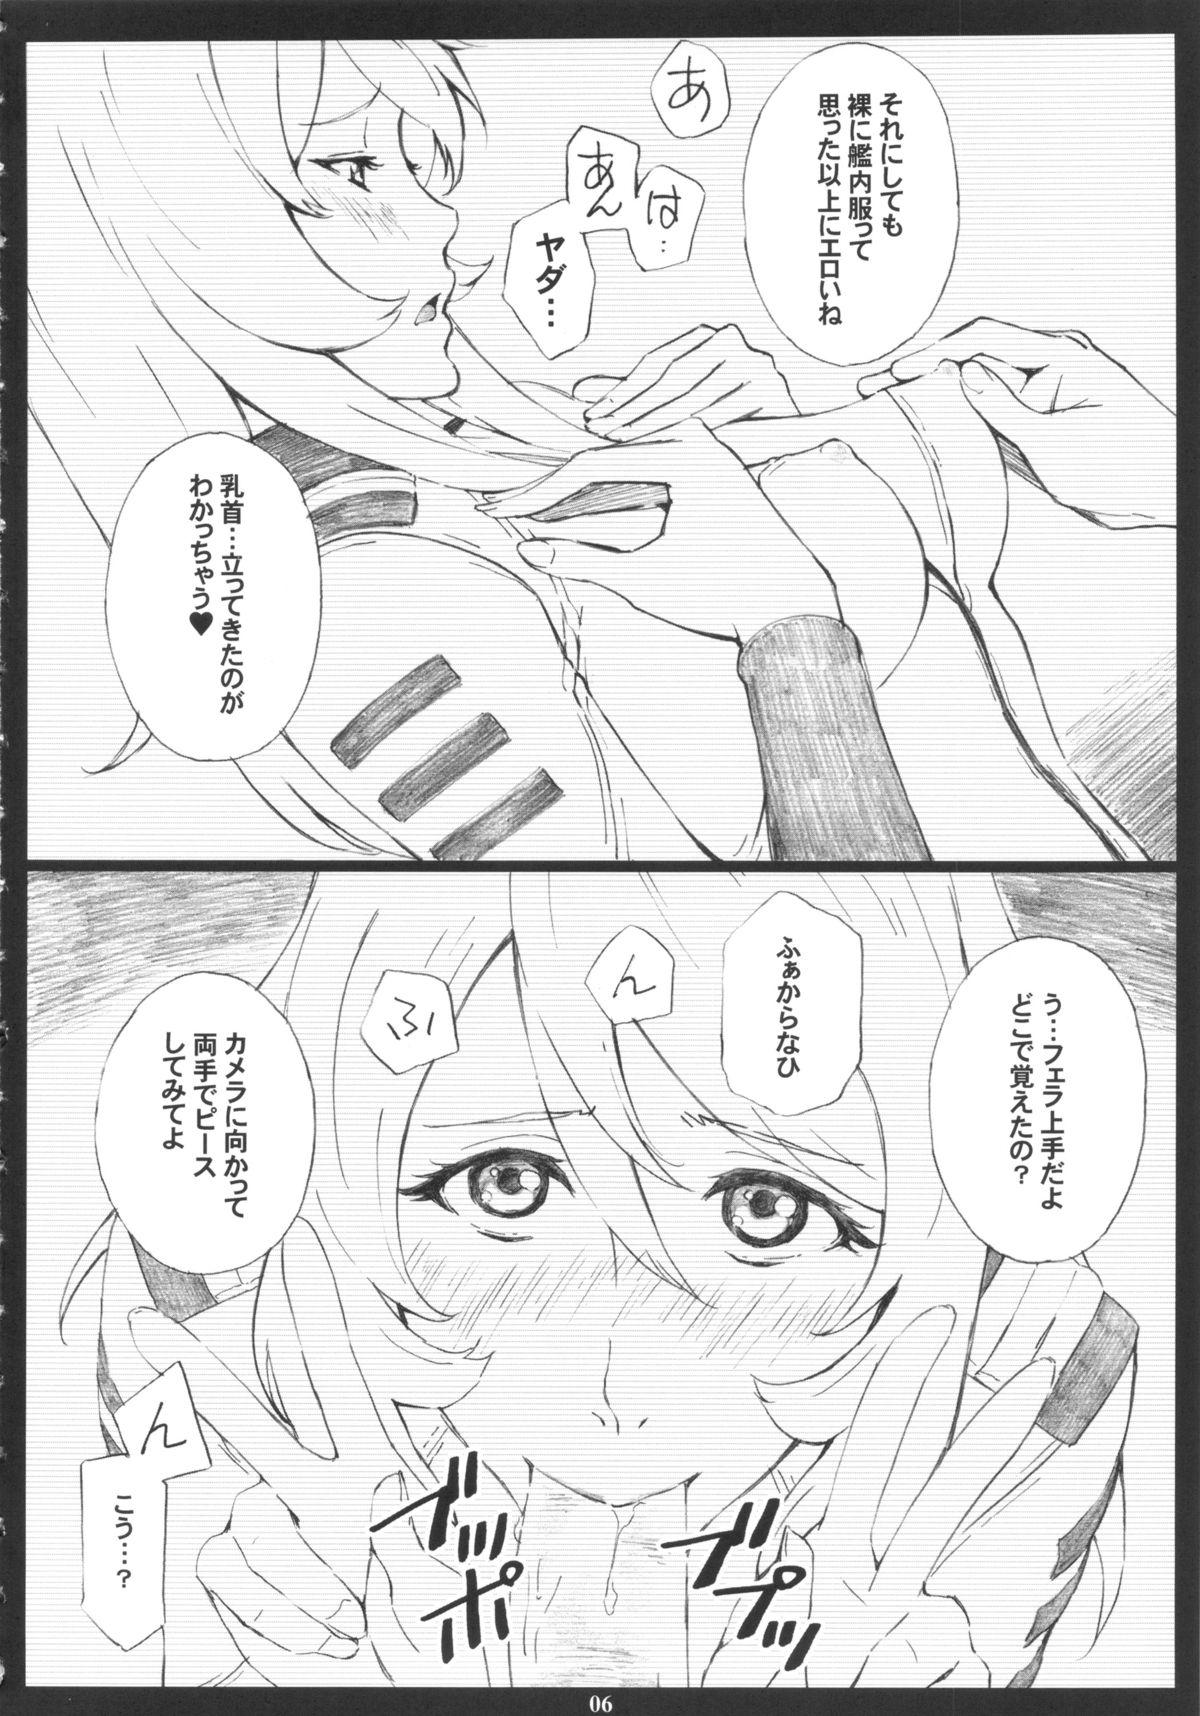 Plumper YMT - Space battleship yamato Casting - Page 5